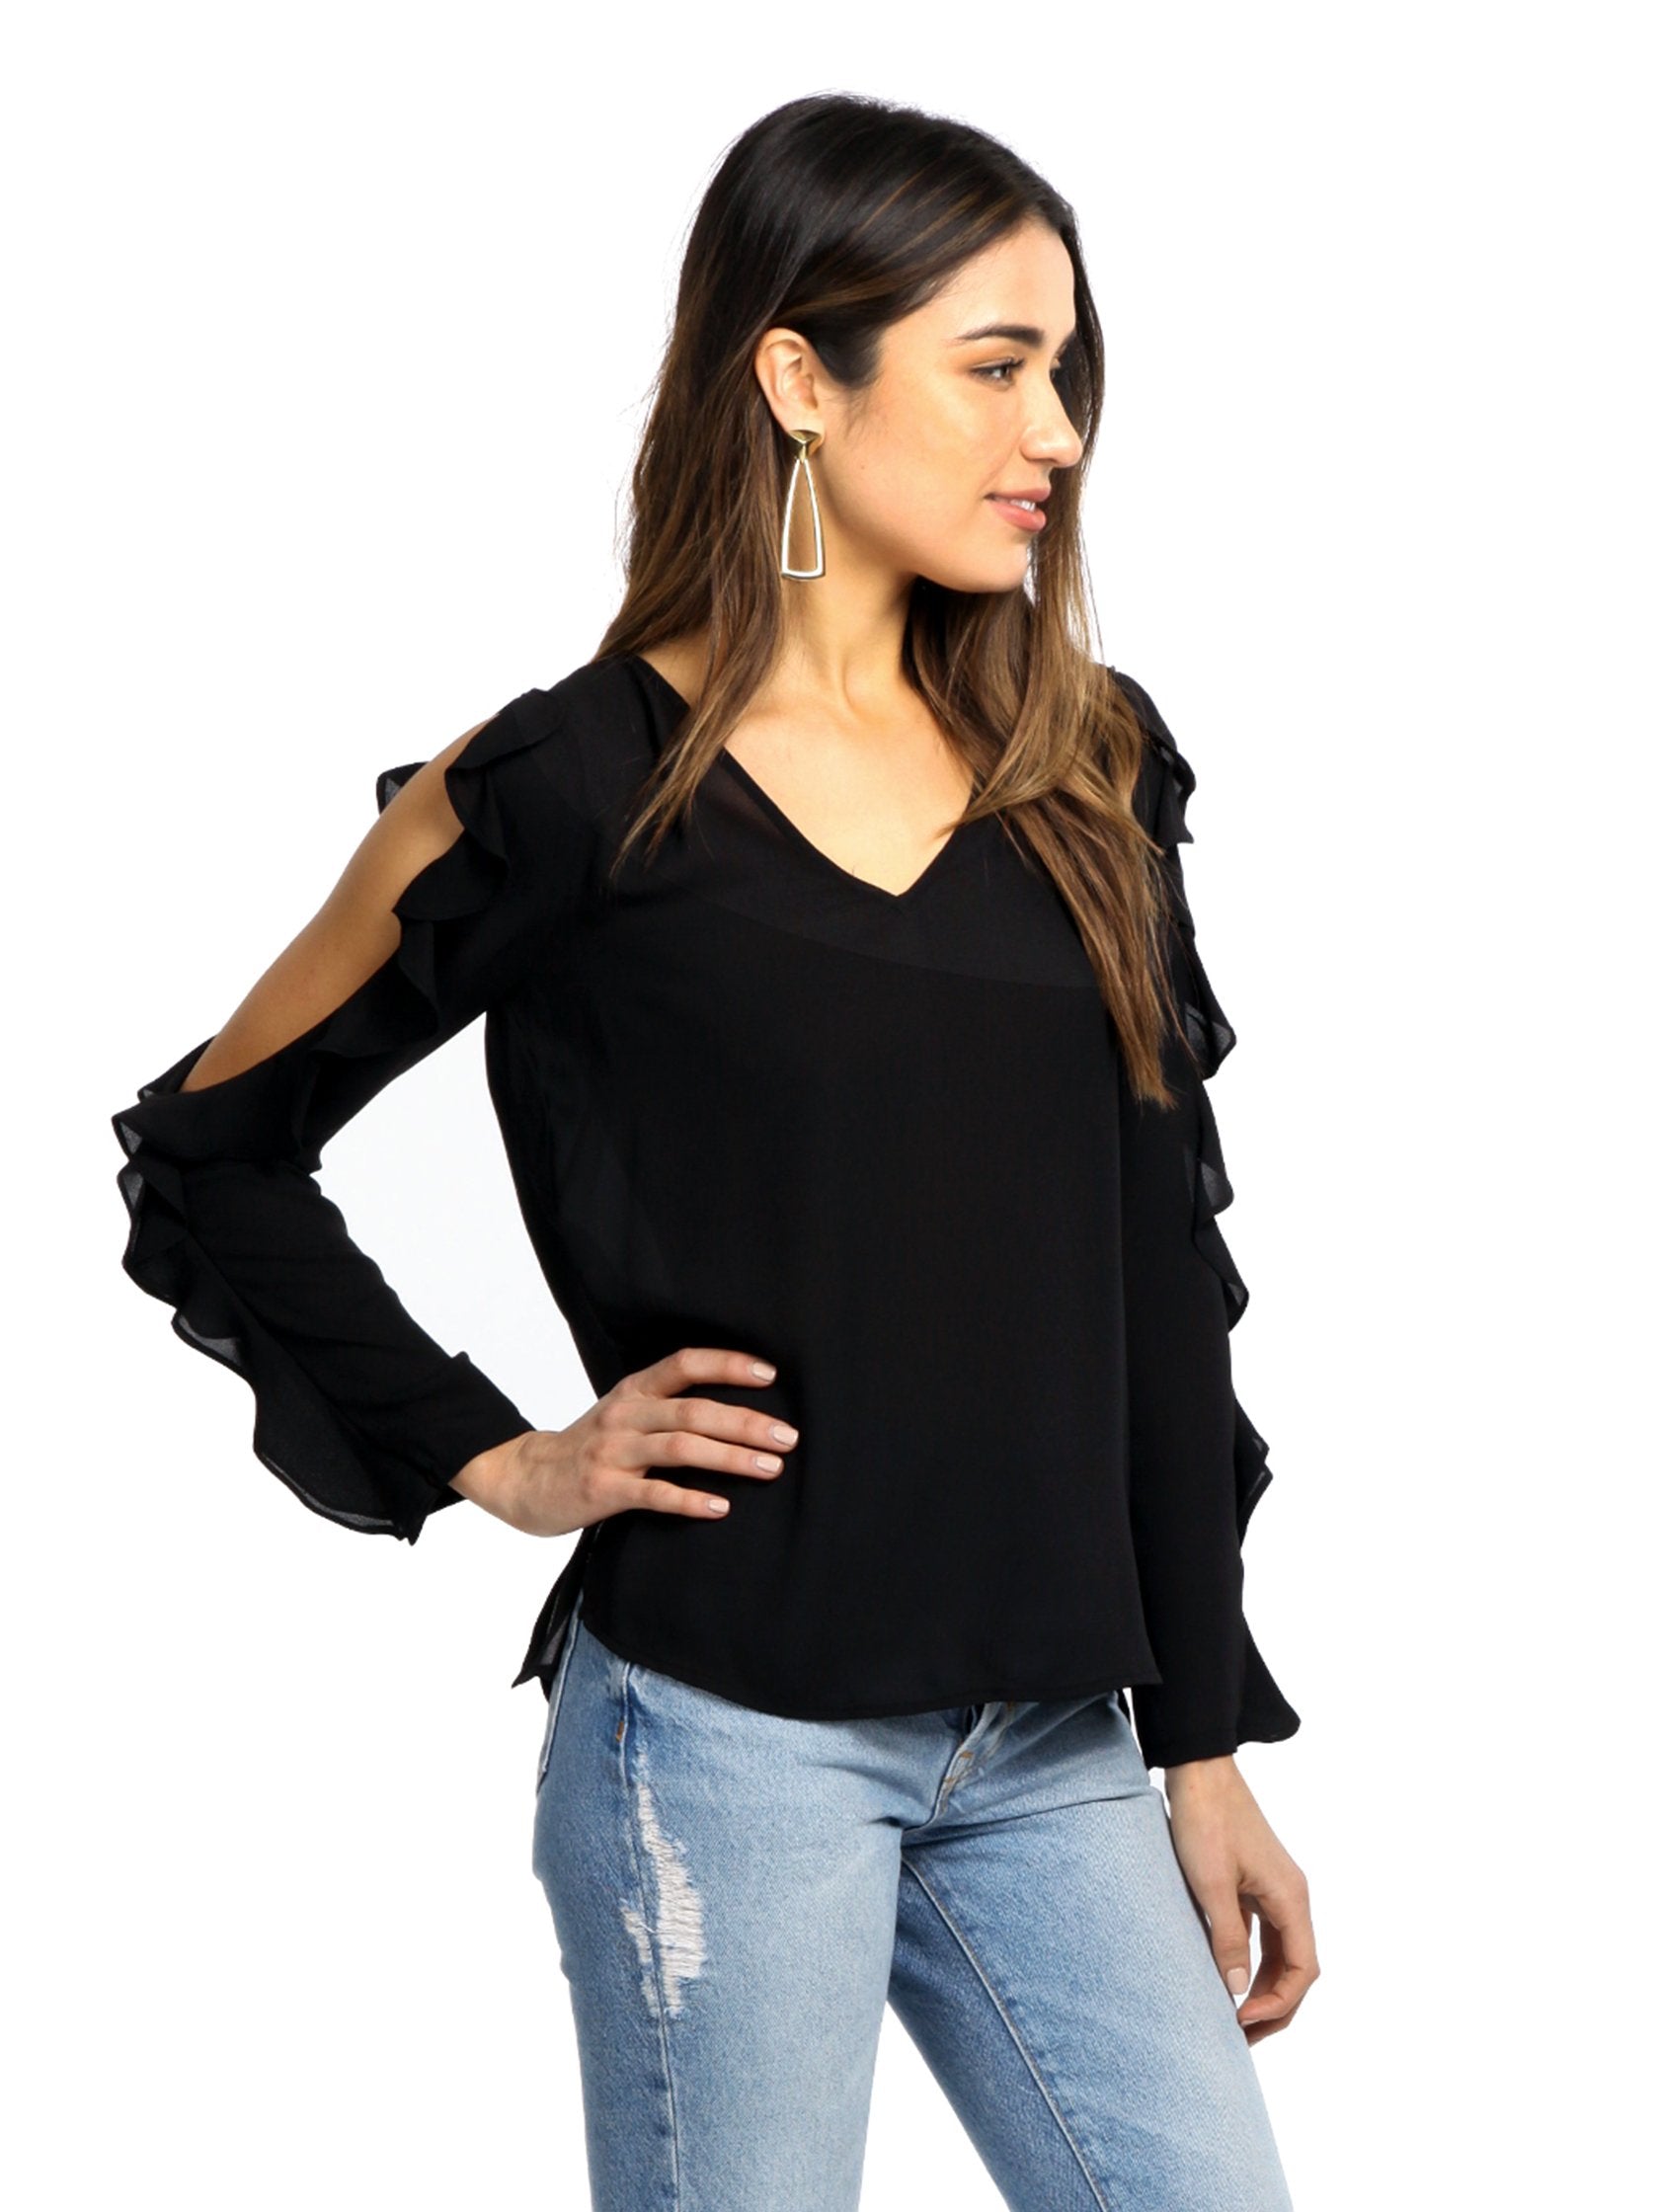 Girl outfit in a top rental from 1.STATE called Ruffle Cold Shoulder Top